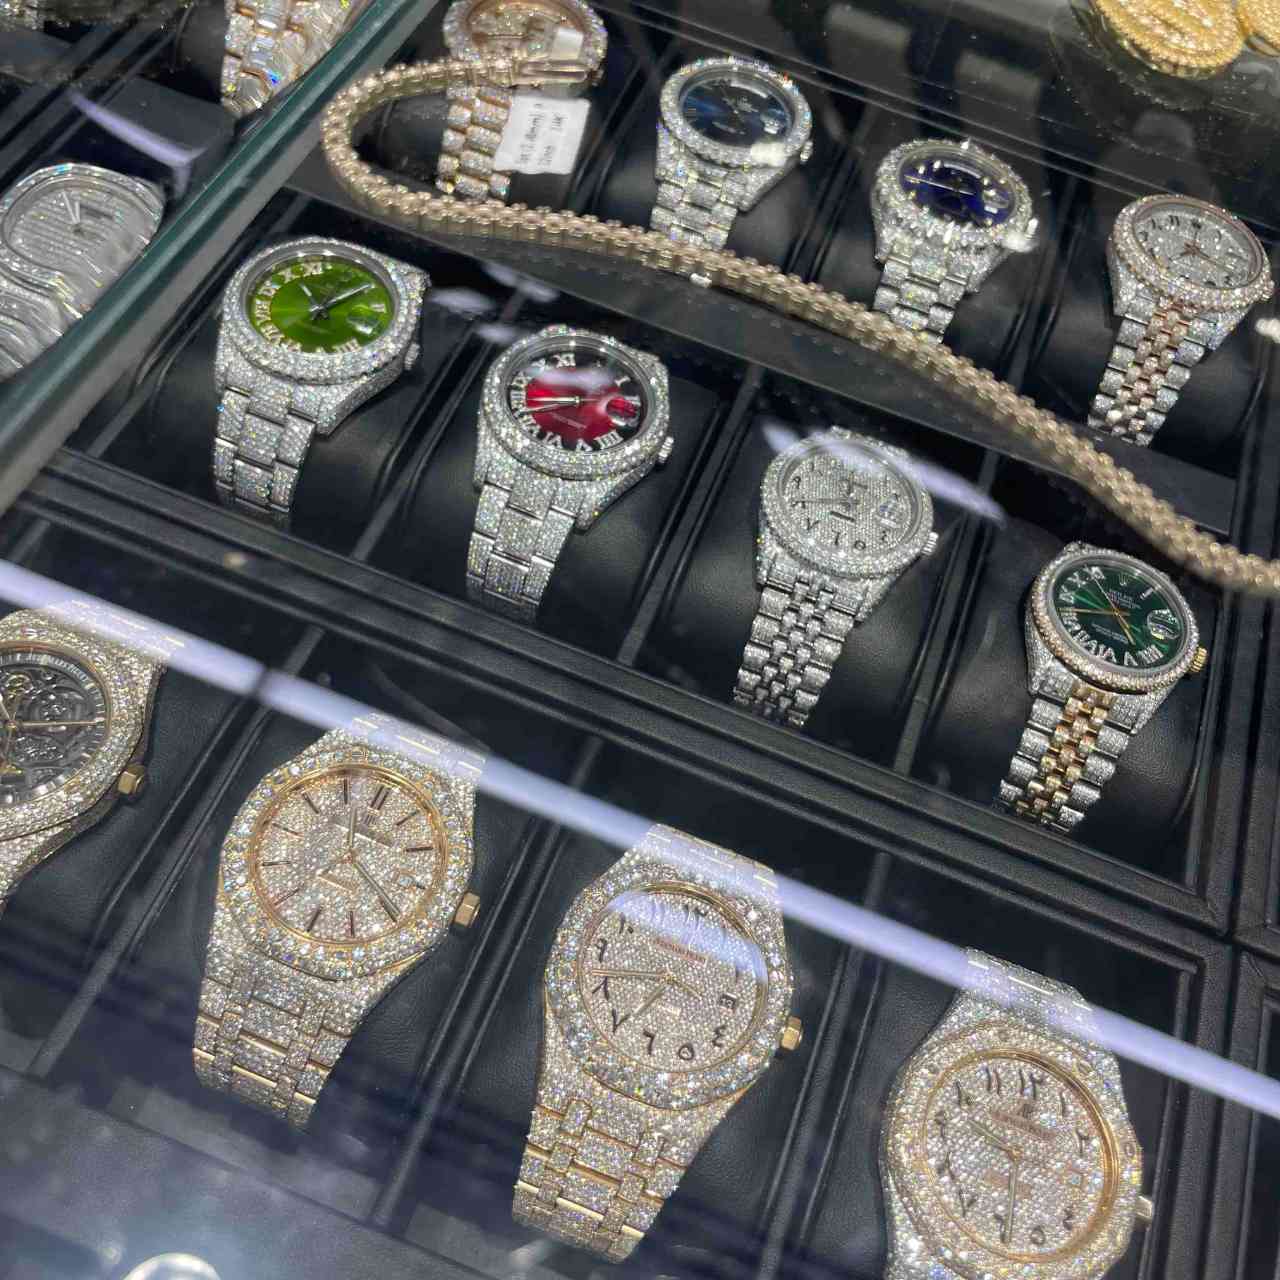 BUST DOWNS ROLEX COLLECTION